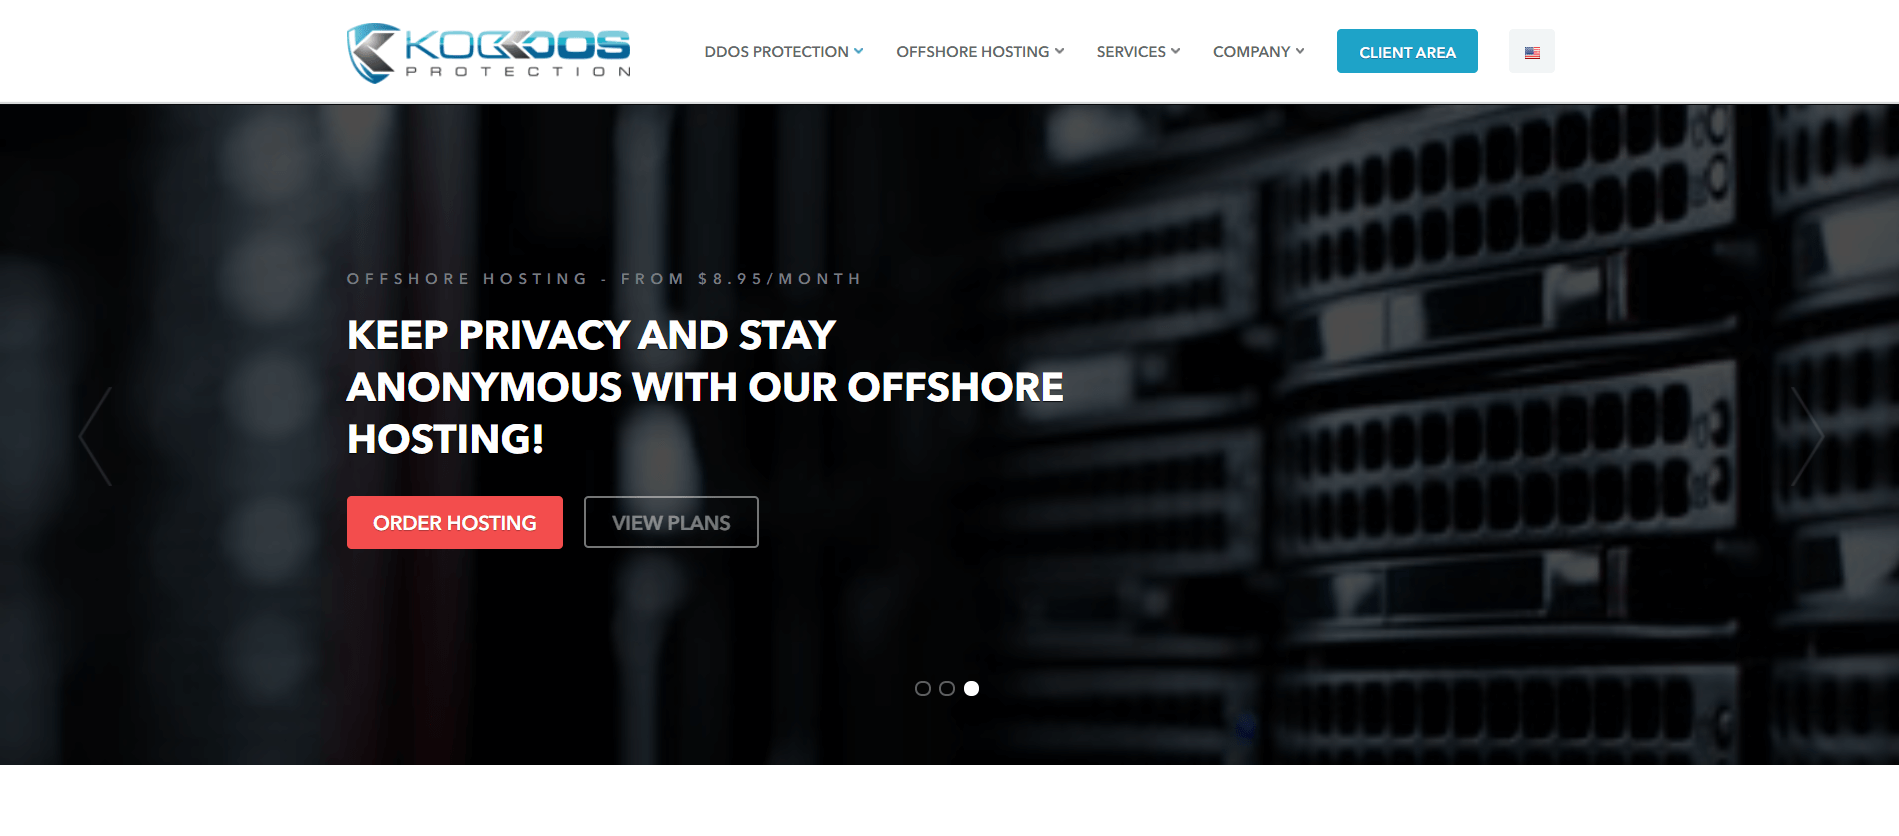 Koddos' homepage, an offshore web hosting option that focuses on security.